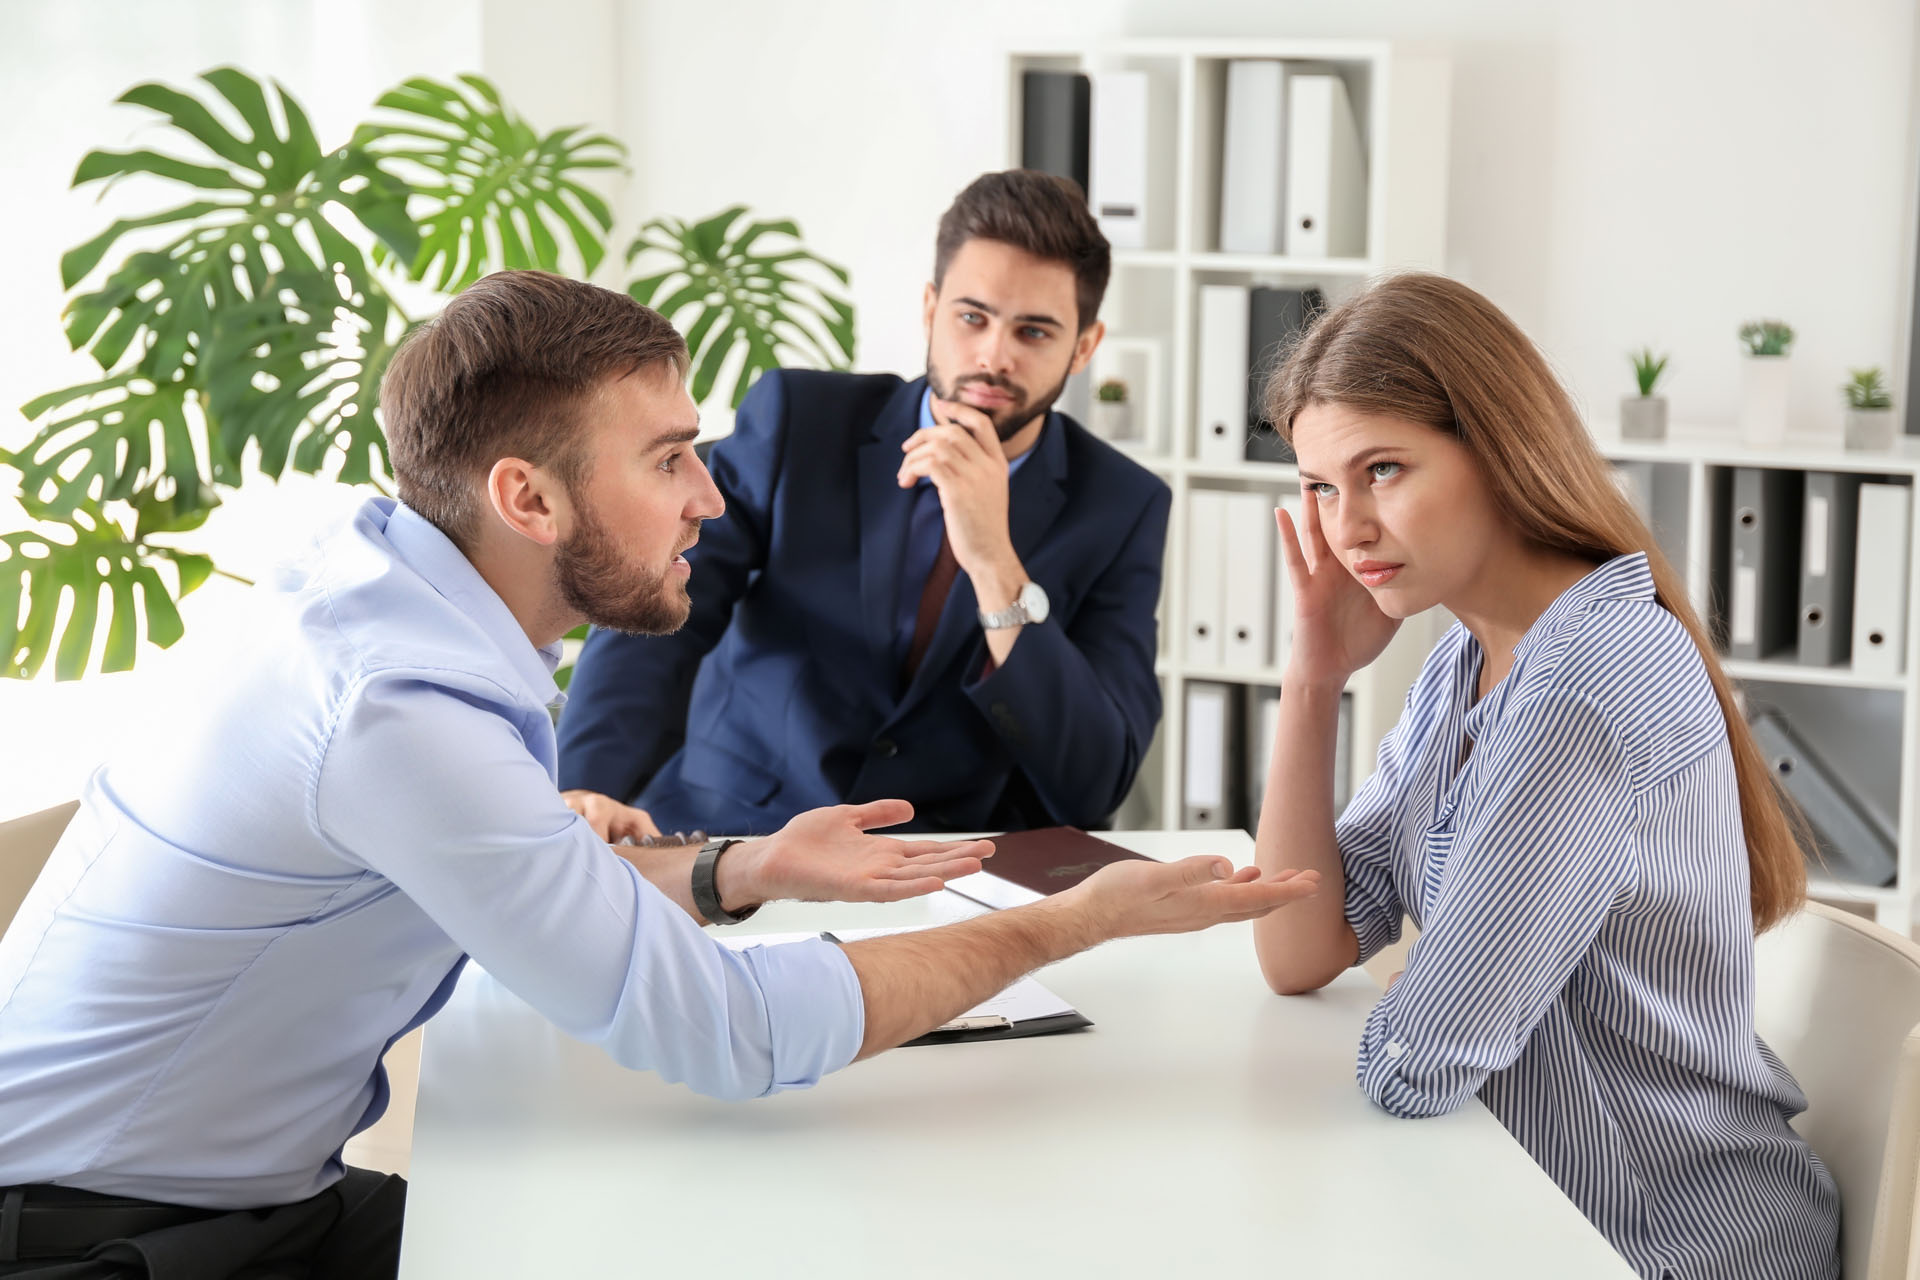 A couple sitting with a divorce mediator, arguing during a mediation session